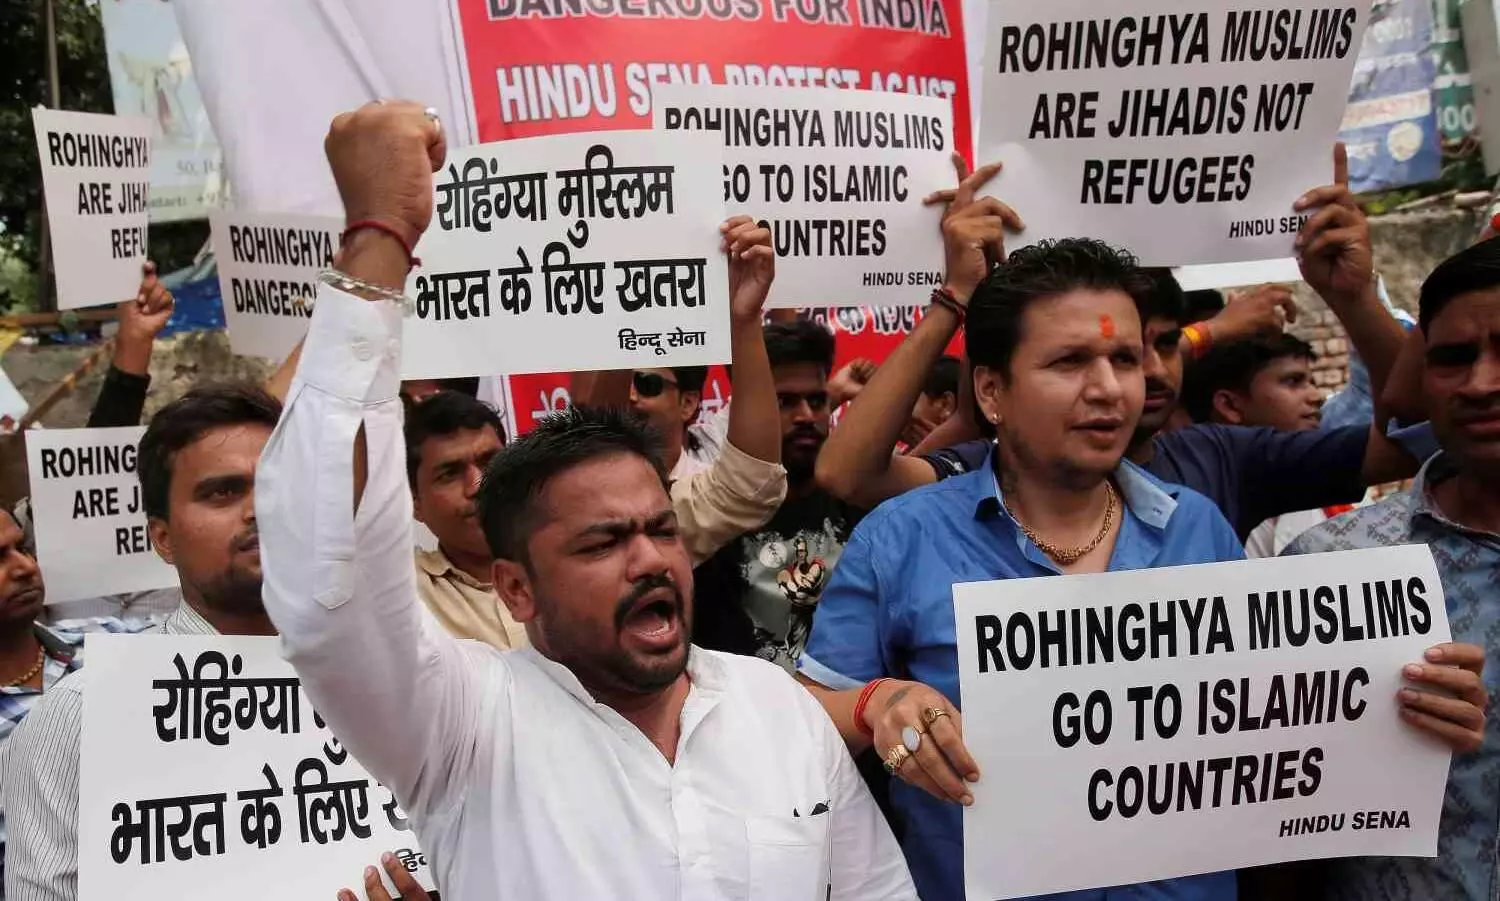 Population, limited resources cited to reject Rohingya, but non-Muslims welcome under CAA